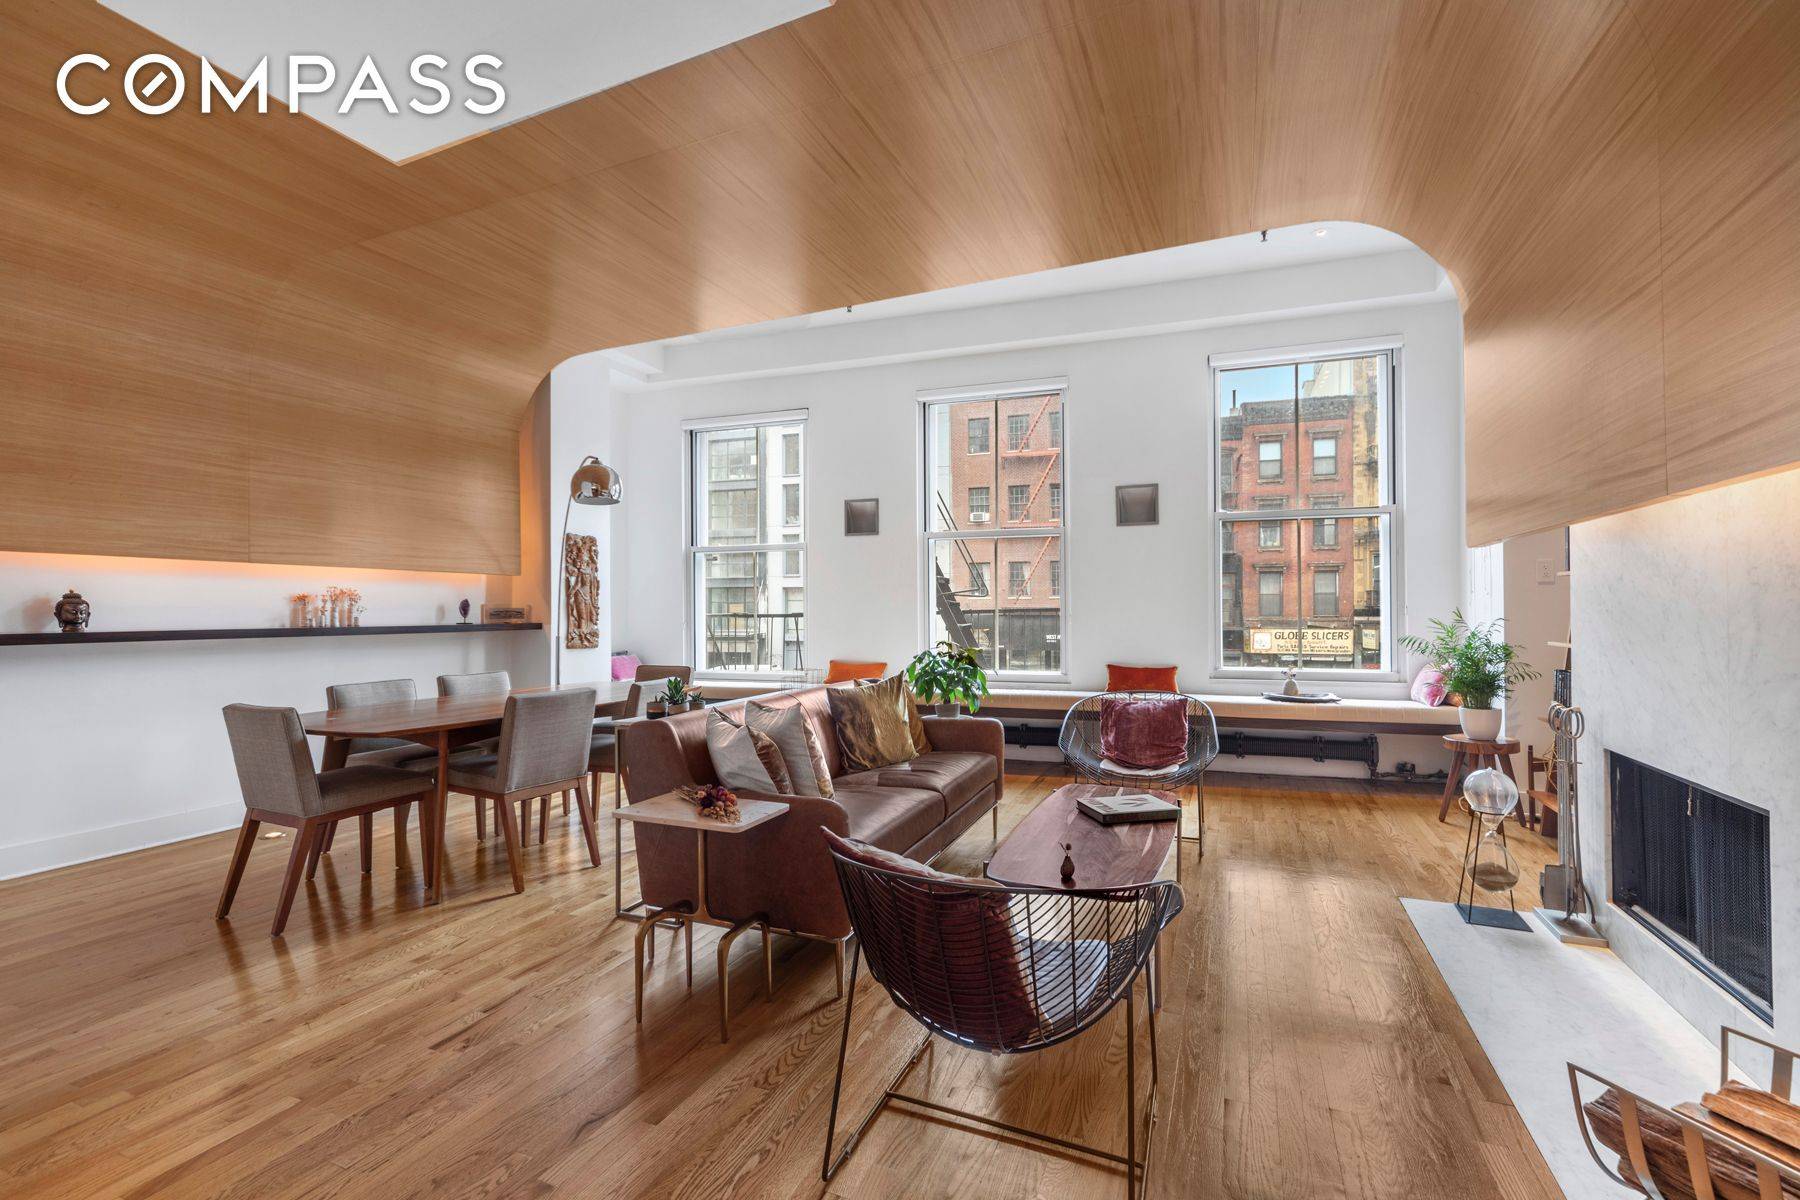 This turn of the century full floor loft designed by West Chin Architects is a must see.